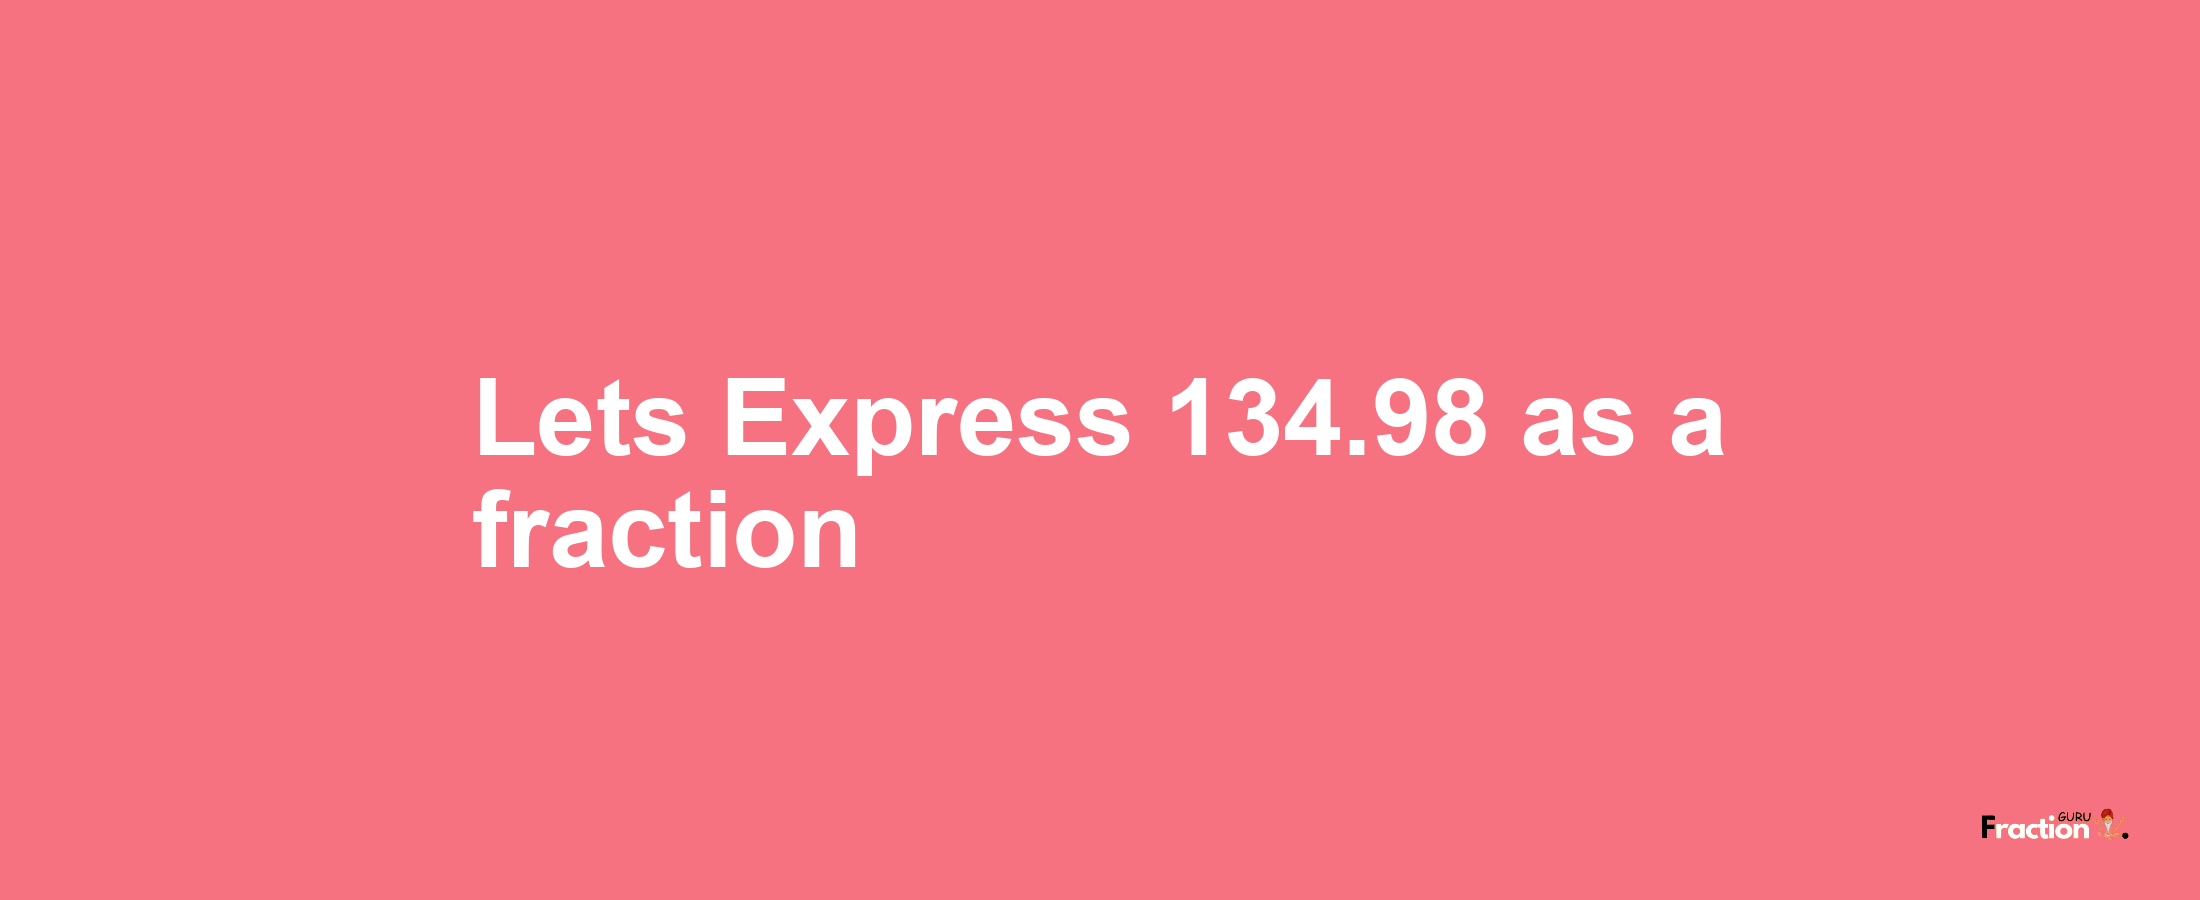 Lets Express 134.98 as afraction